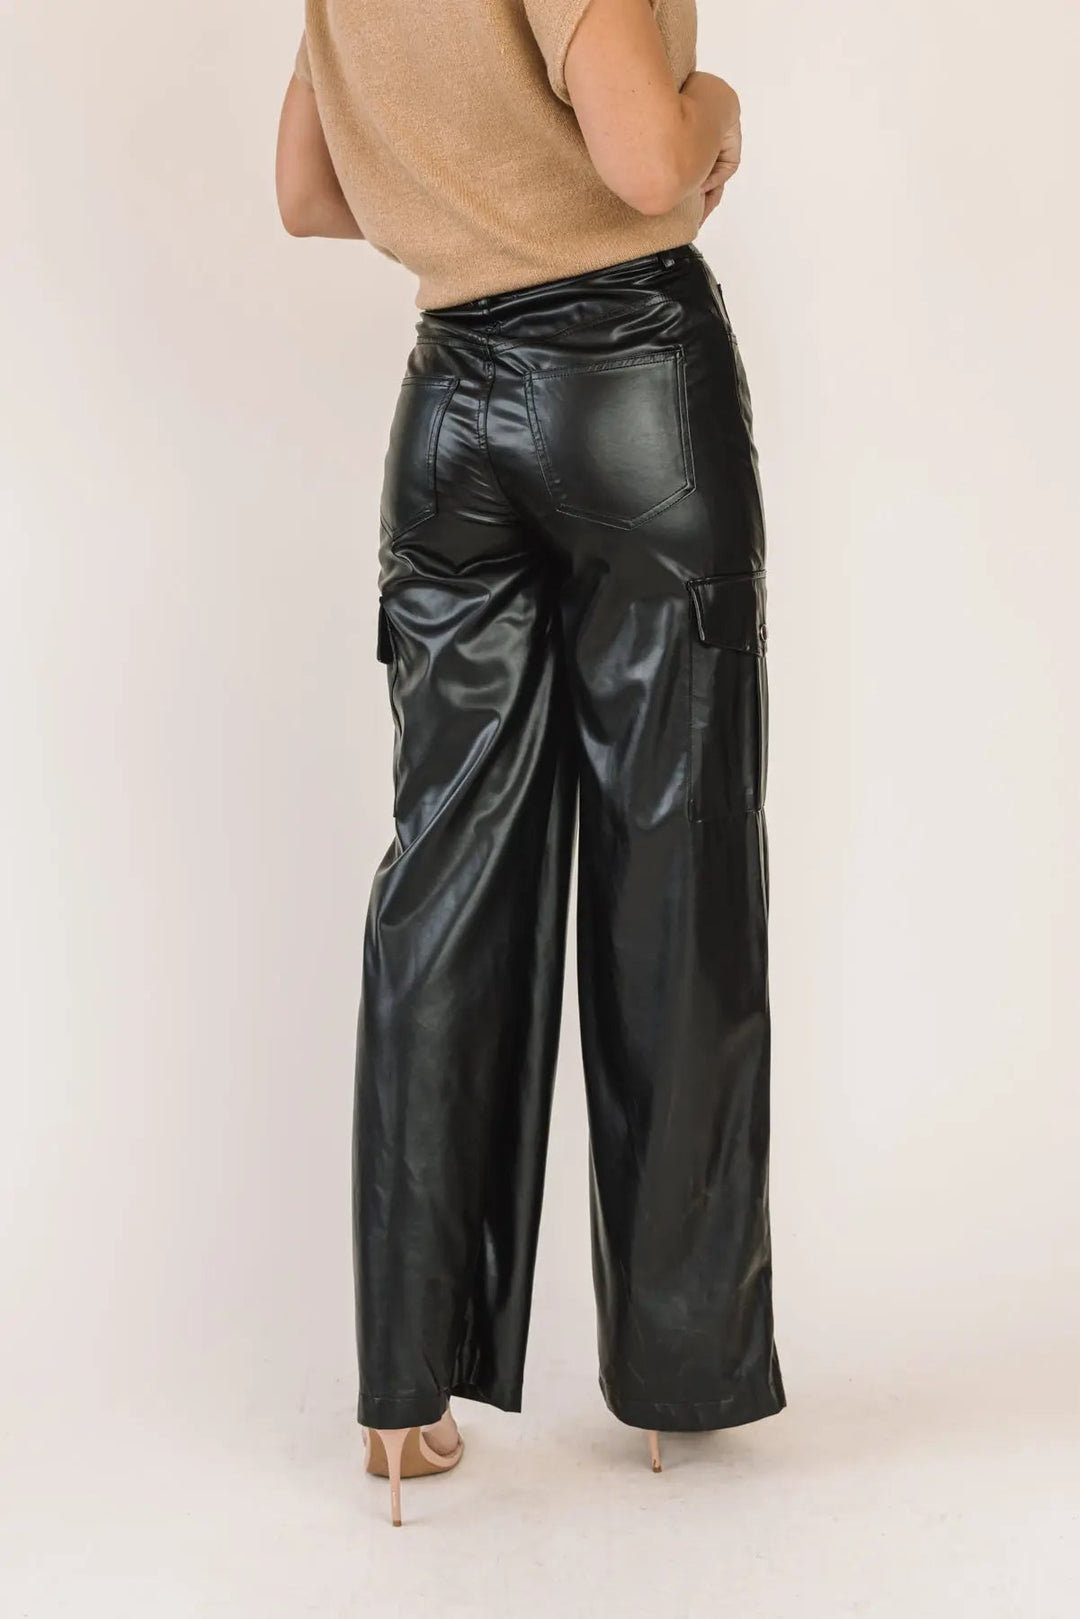 Trendy Girl Black Faux Leather Pants: Transition from Day to Night